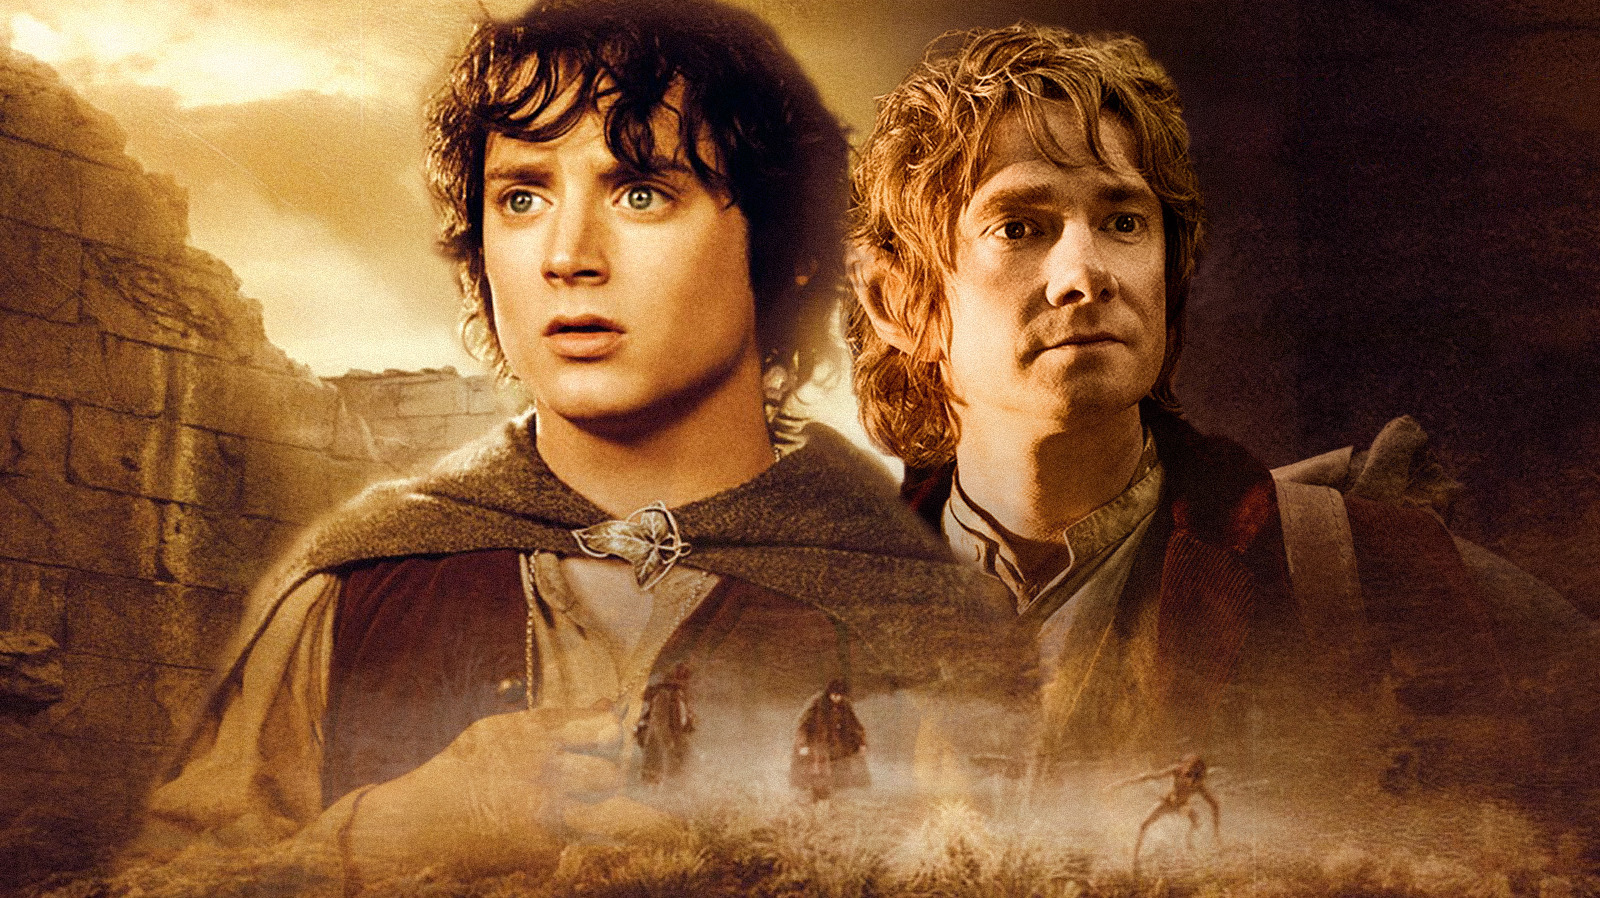 Did 'The Lord of the Rings' Movies Win Any Oscars?